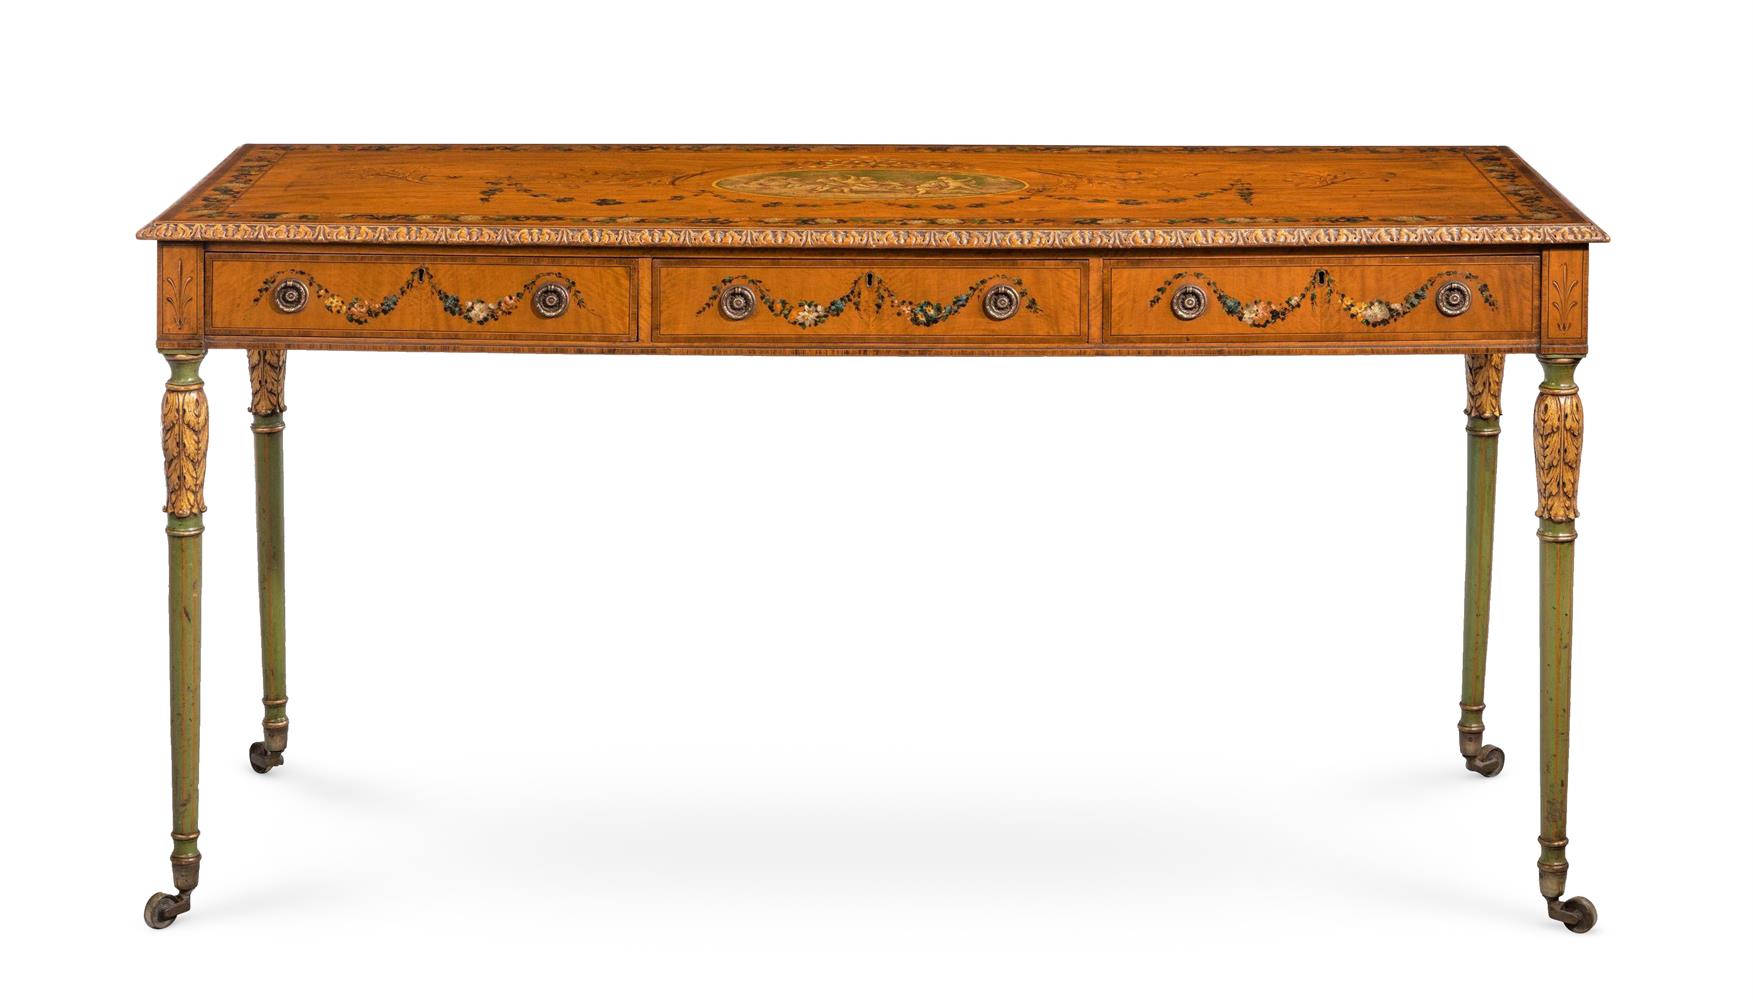 Y AN UNUSUAL SATINWOOD AND PAINTED CENTRE OR SIDE TABLE, LATE 19TH/ 20TH CENTURY - Image 2 of 9